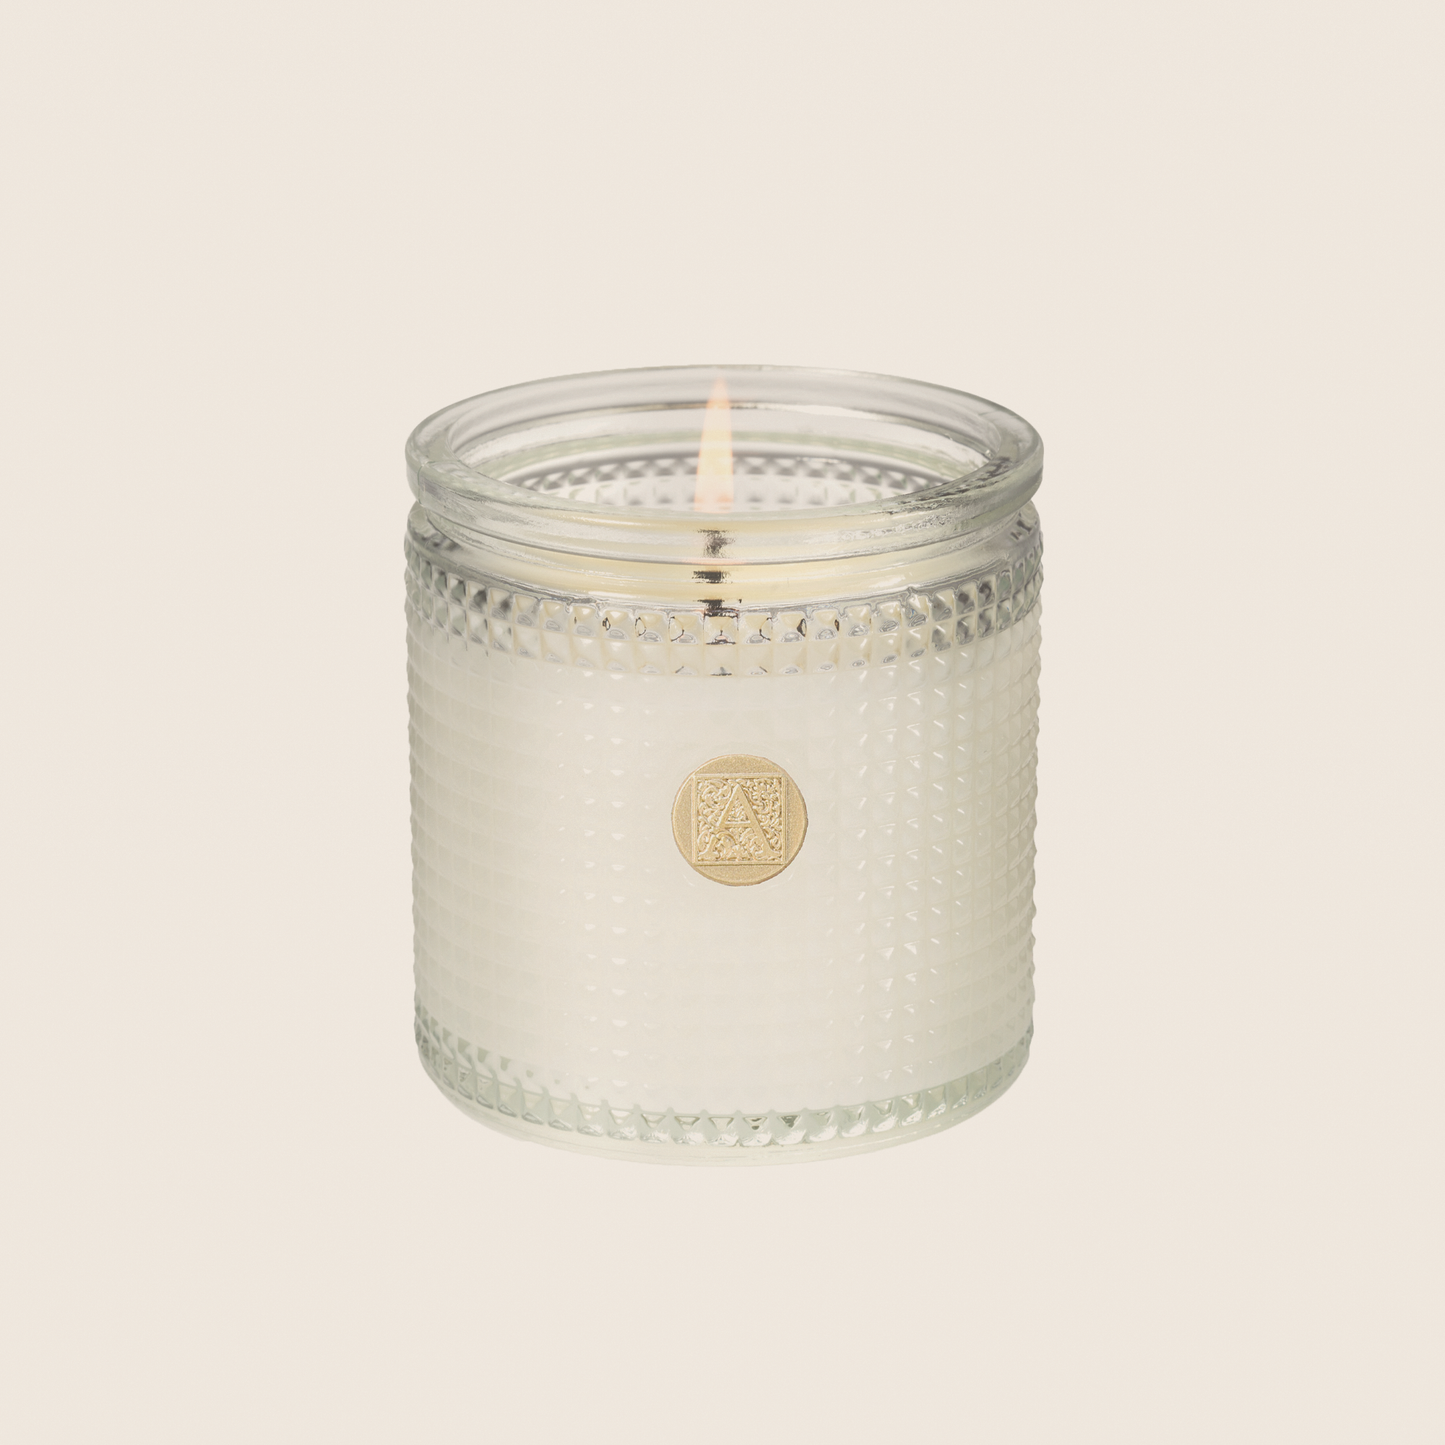 New! Sunkissed Sandalwood - Textured Glass Candle